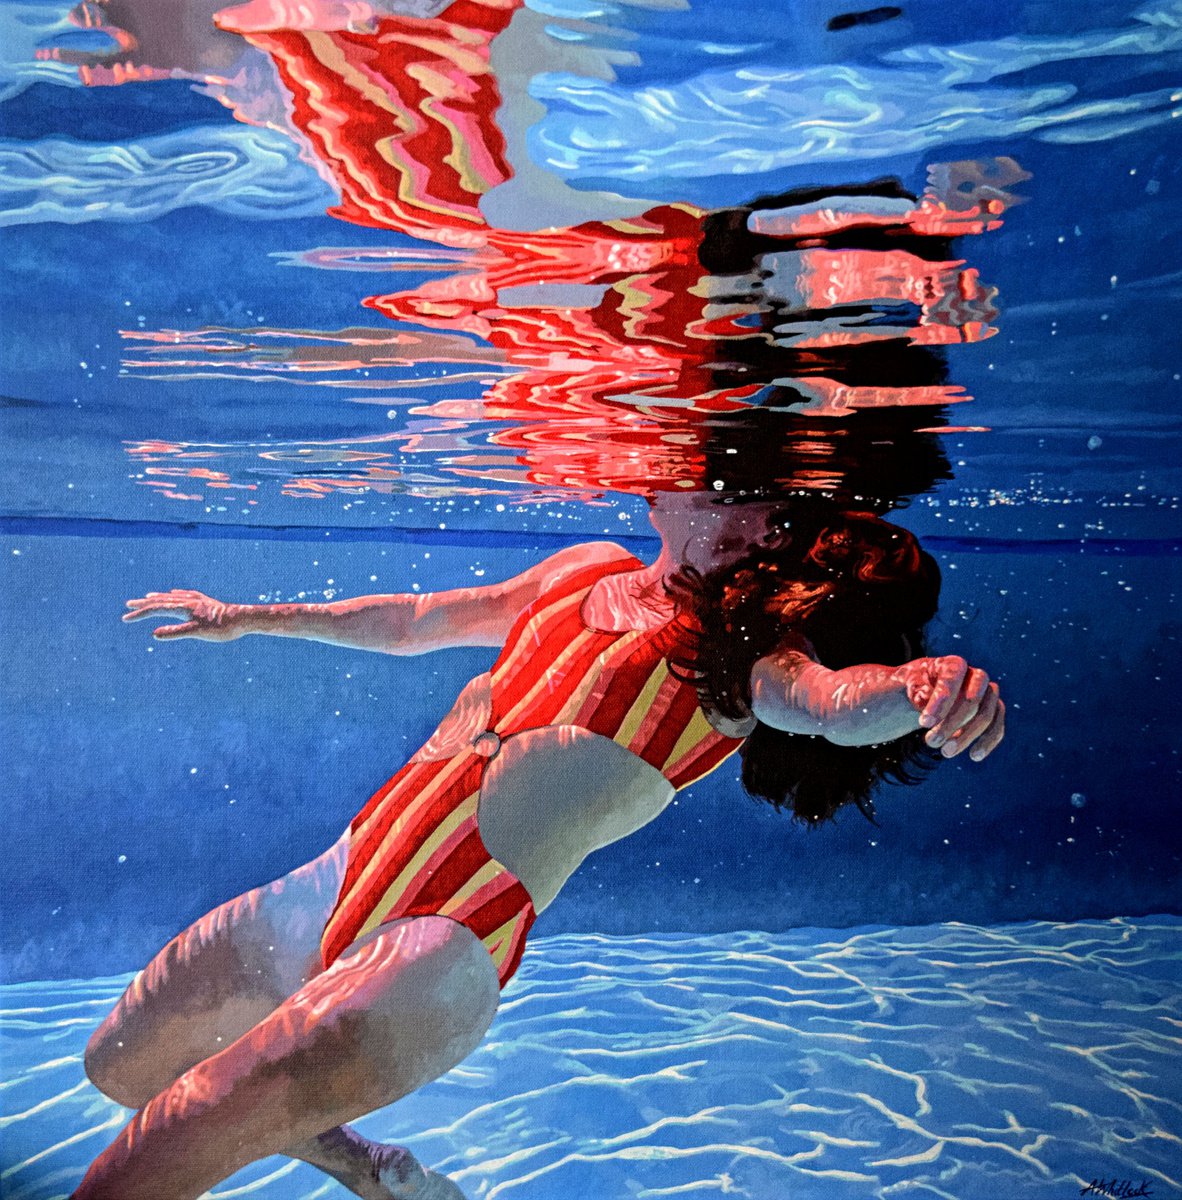 Equilibrium - Underwater Painting by Abi Whitlock